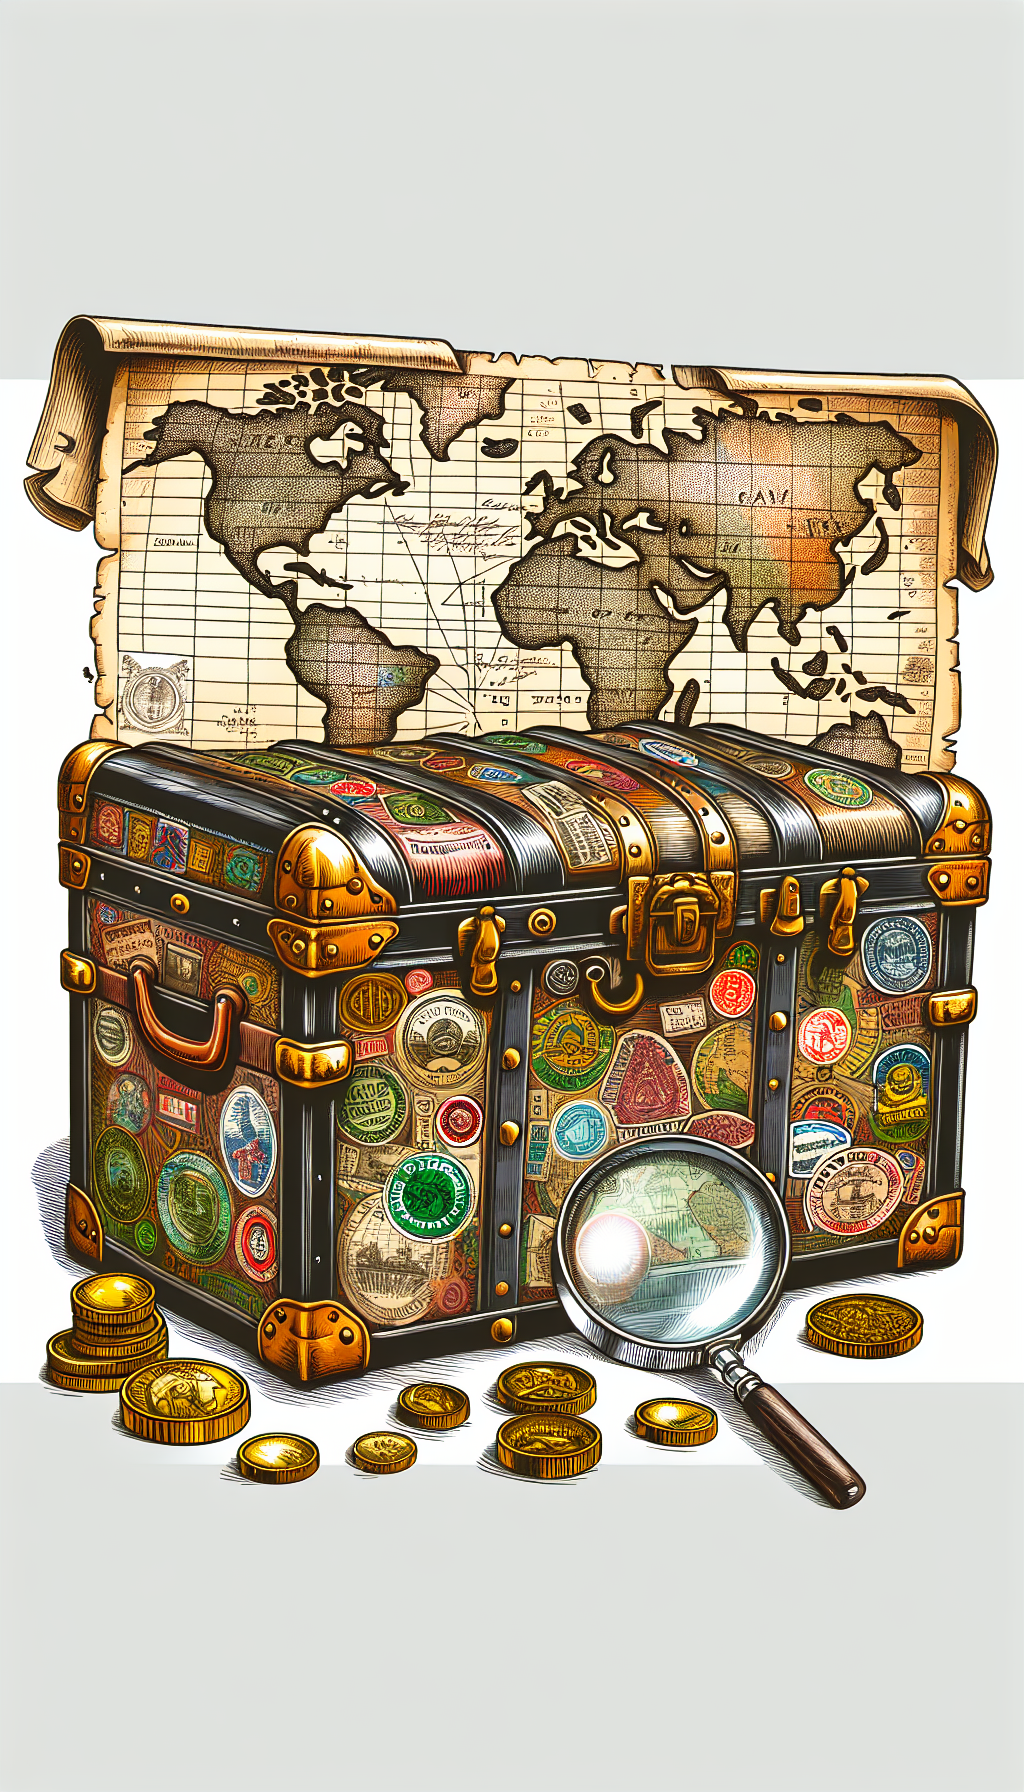 An illustration depicts an old, ornate steamer trunk adorned with vintage travel stickers indicating a rich history of global voyages. A faded map unfurls behind it, highlighting key historic routes, while golden coins and an appraiser's magnifying glass rest atop the trunk, symbolizing its antique value. The image combines detailed line art for the trunk with watercolor textures for the background elements.